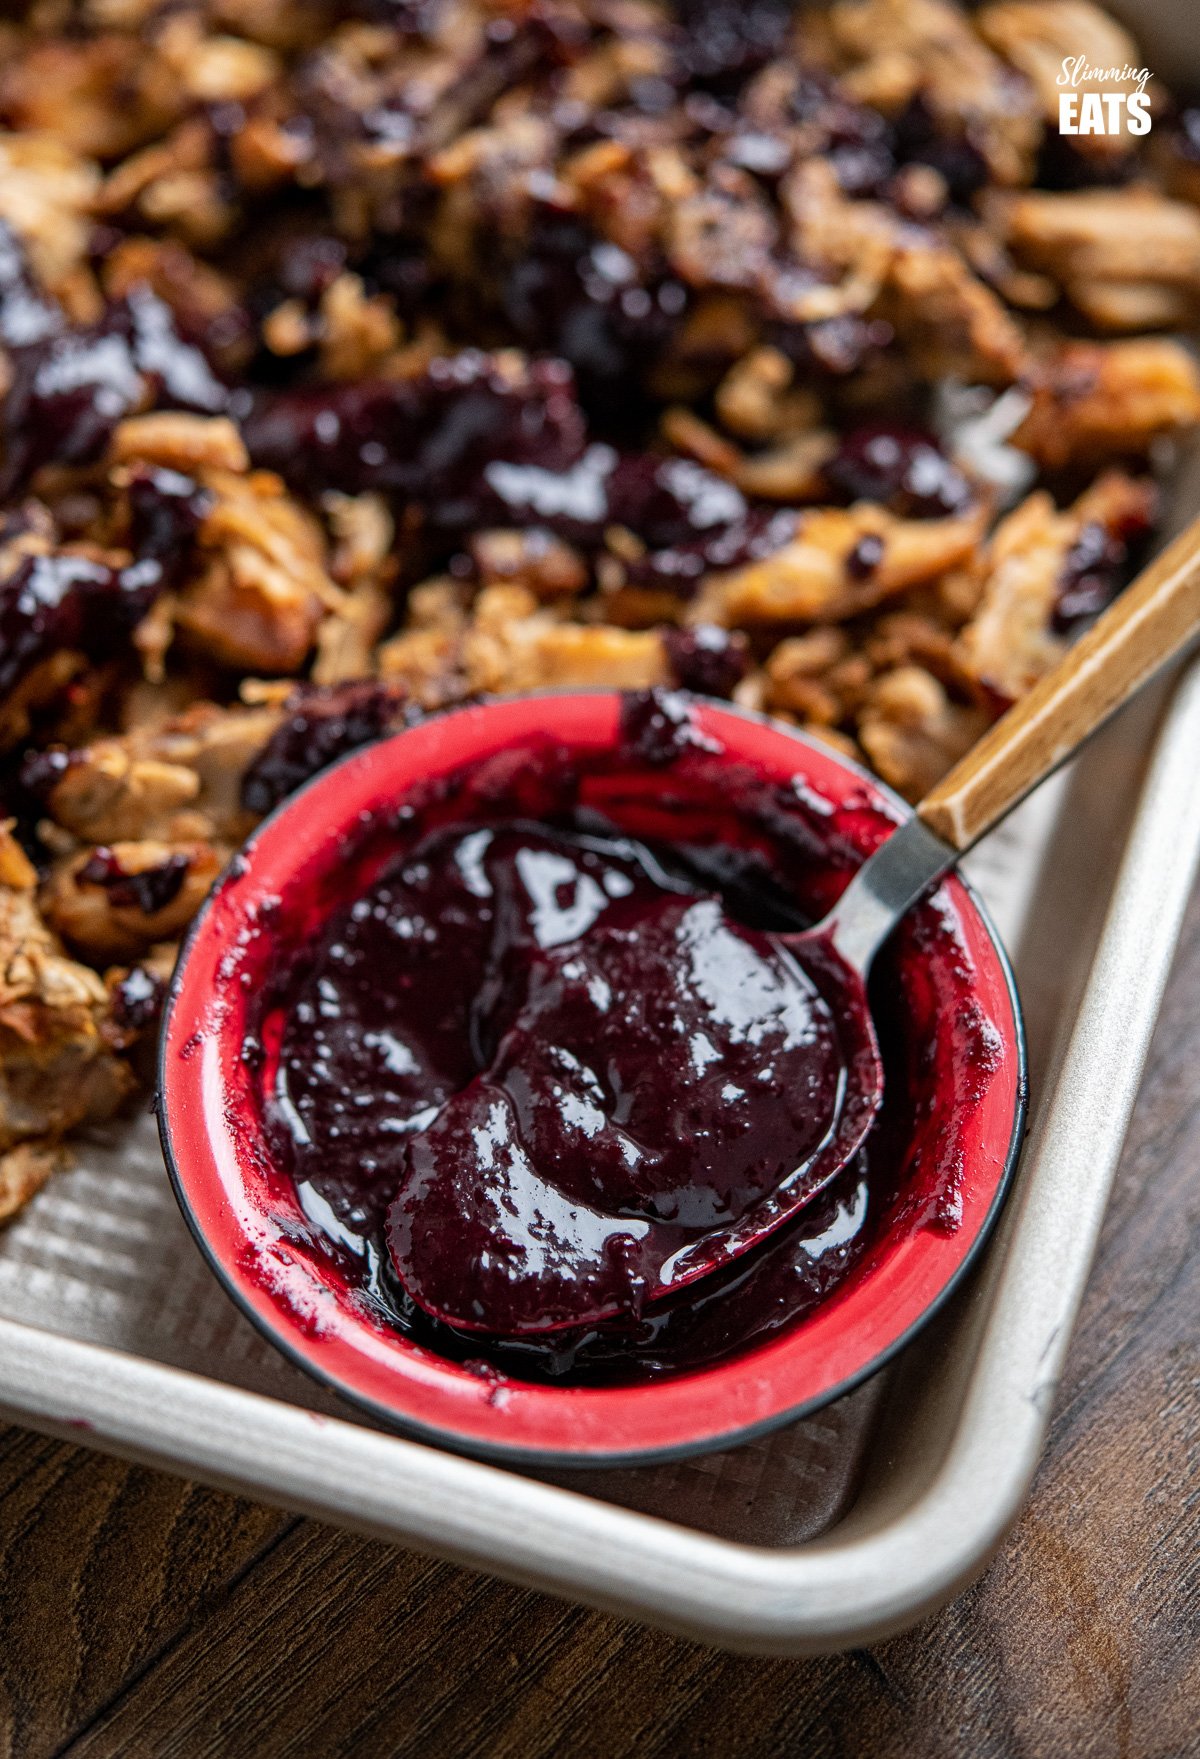 blueberry bbq sauce in small red bowl with a spoon on baking tray with pulled pork